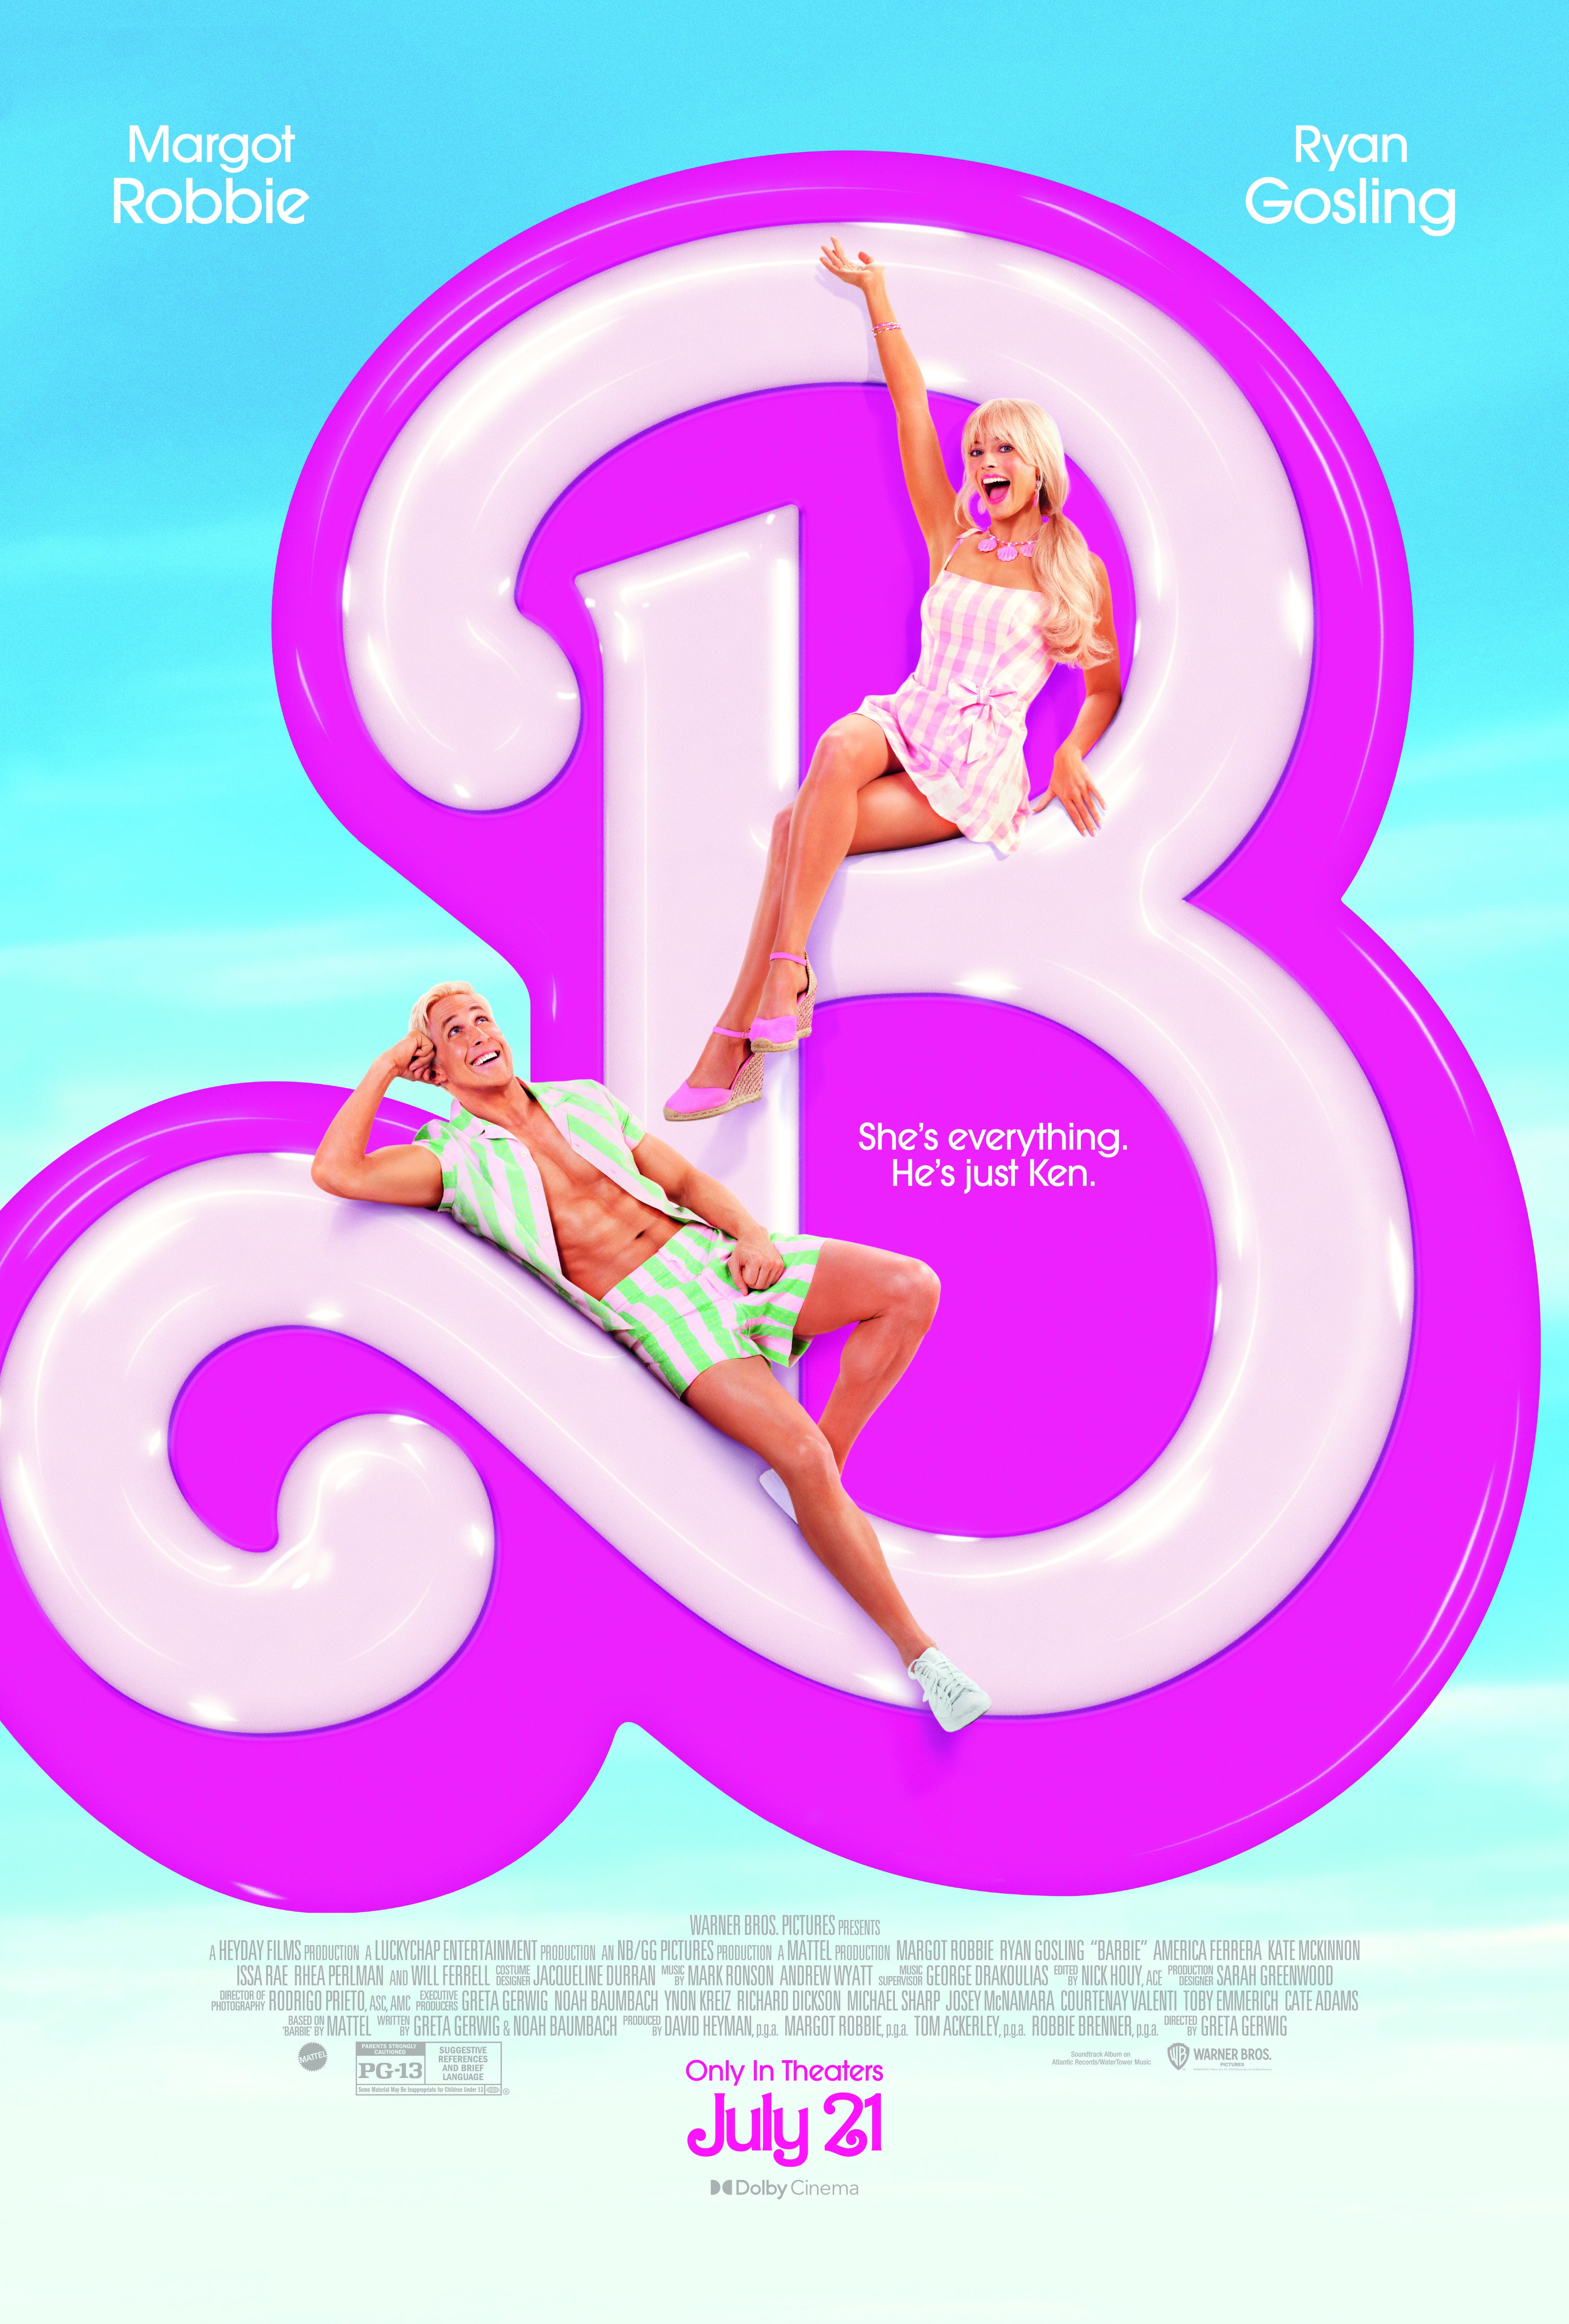 The official Barbie poster with Margot Robbie and Ryan Gosling